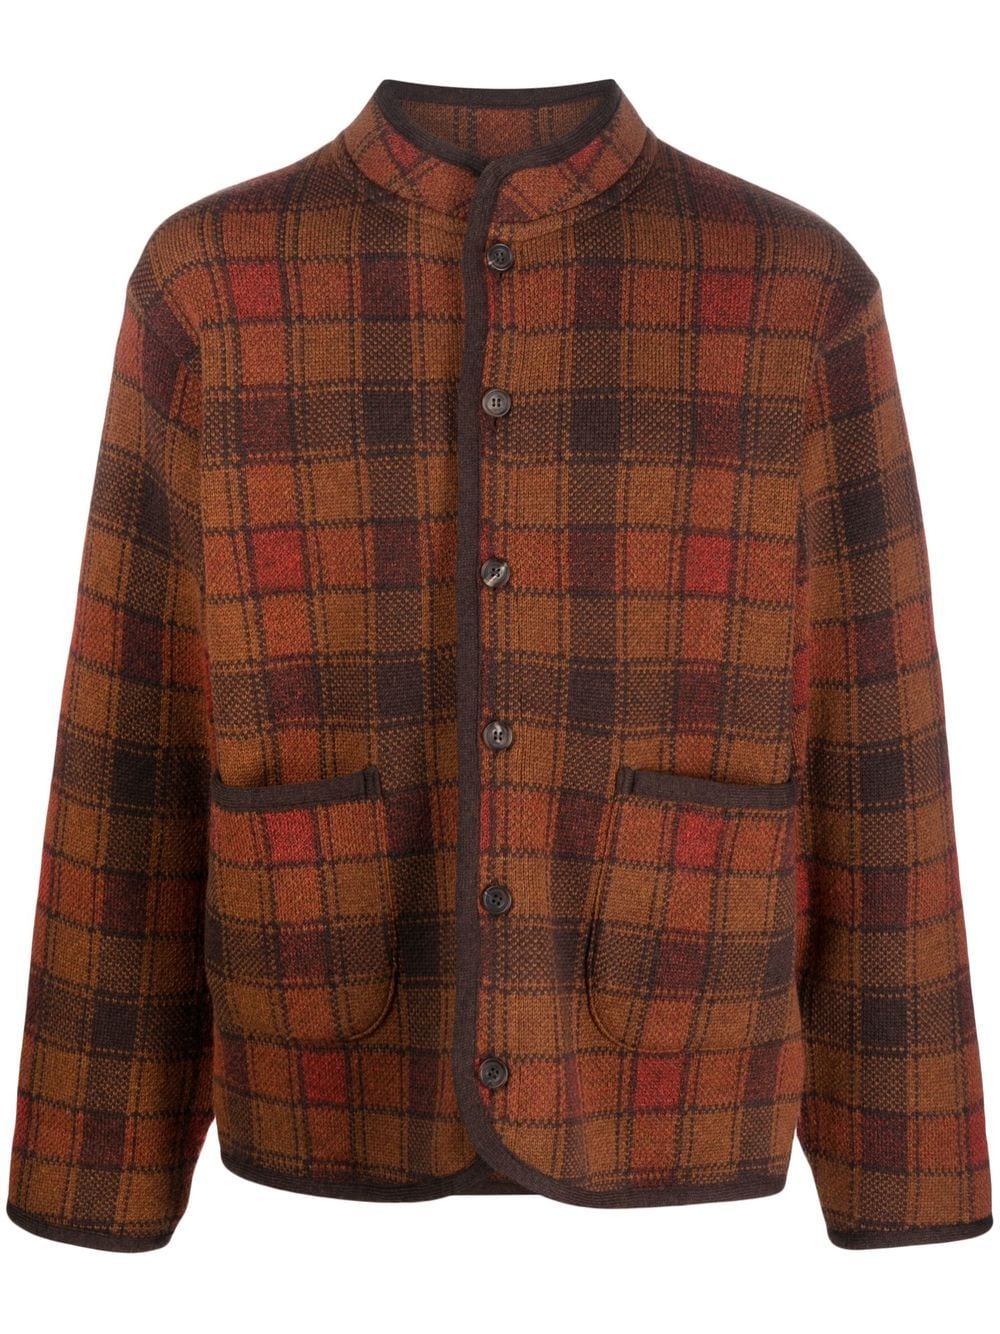 White Mountaineering checked band-collar cardi-coat - Brown von White Mountaineering